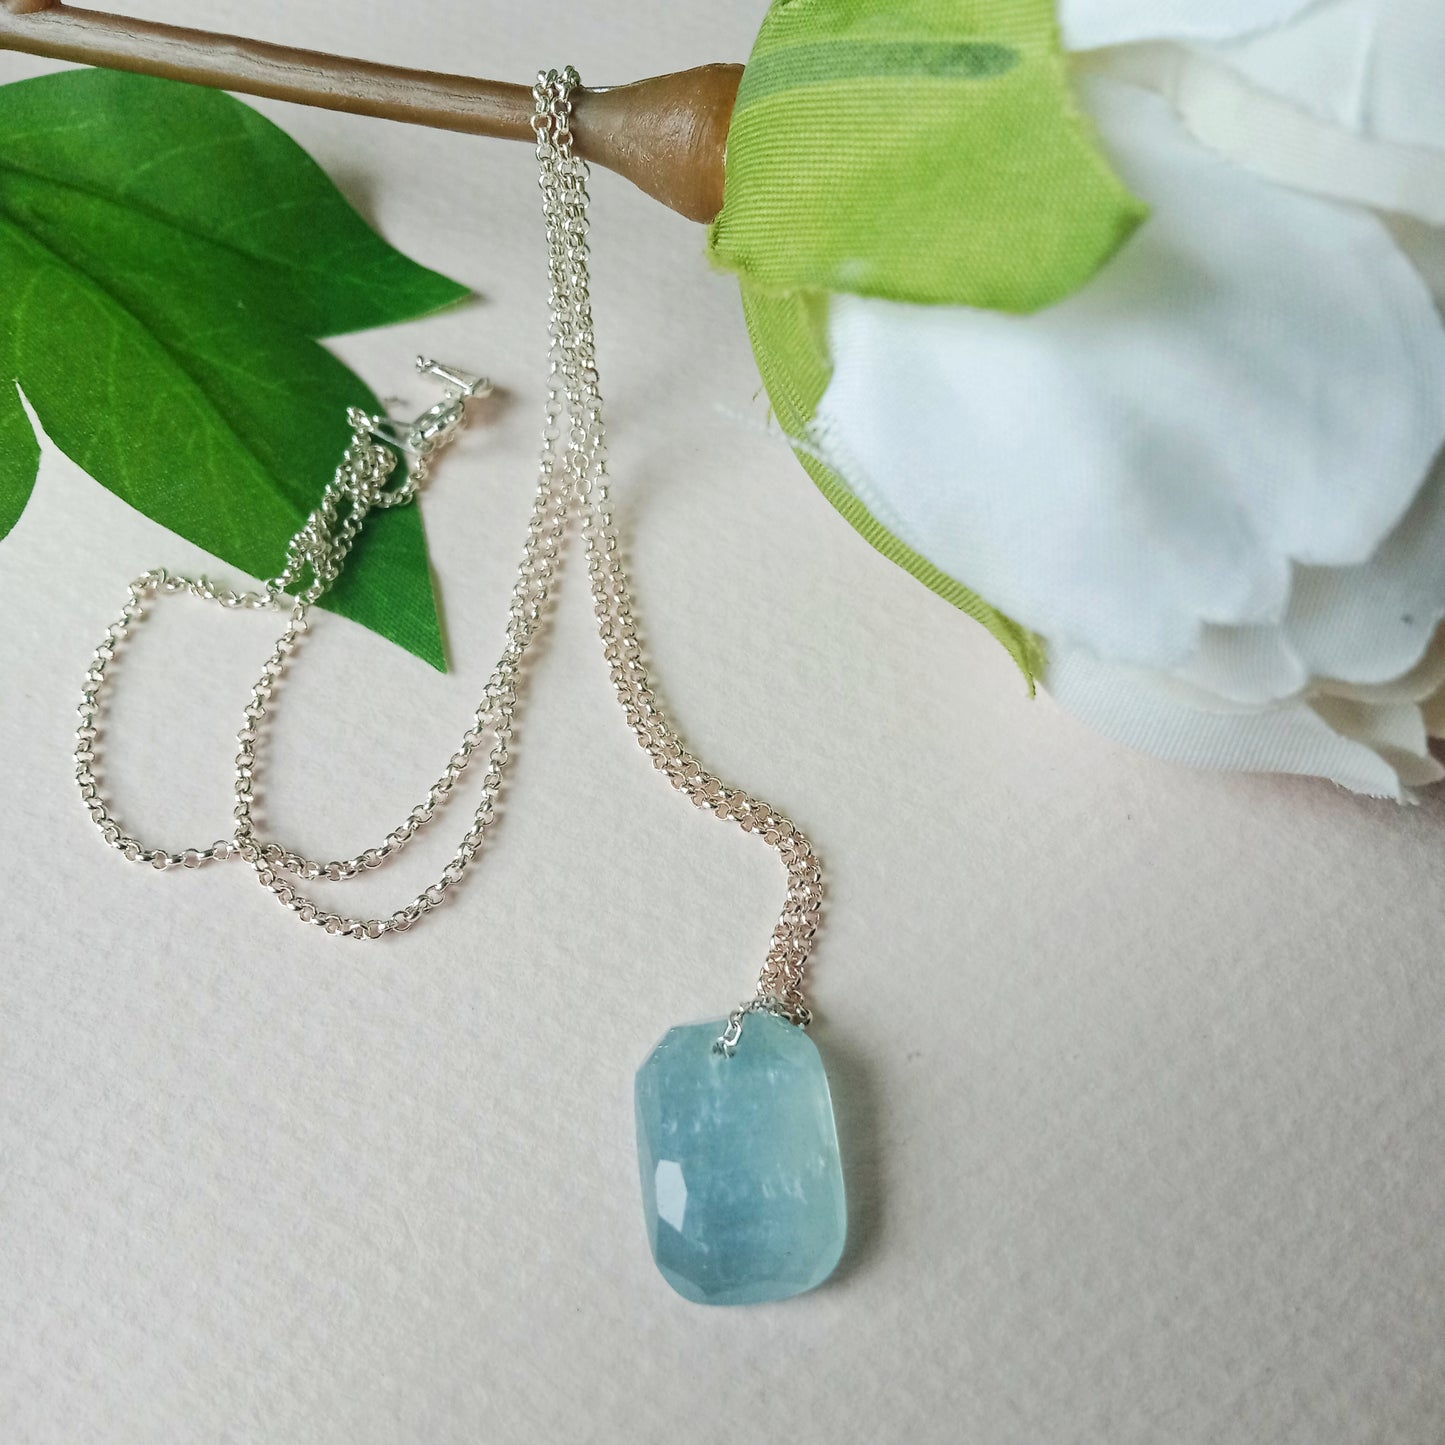 Natural faceted aquamarine cabochon sterling silver necklace